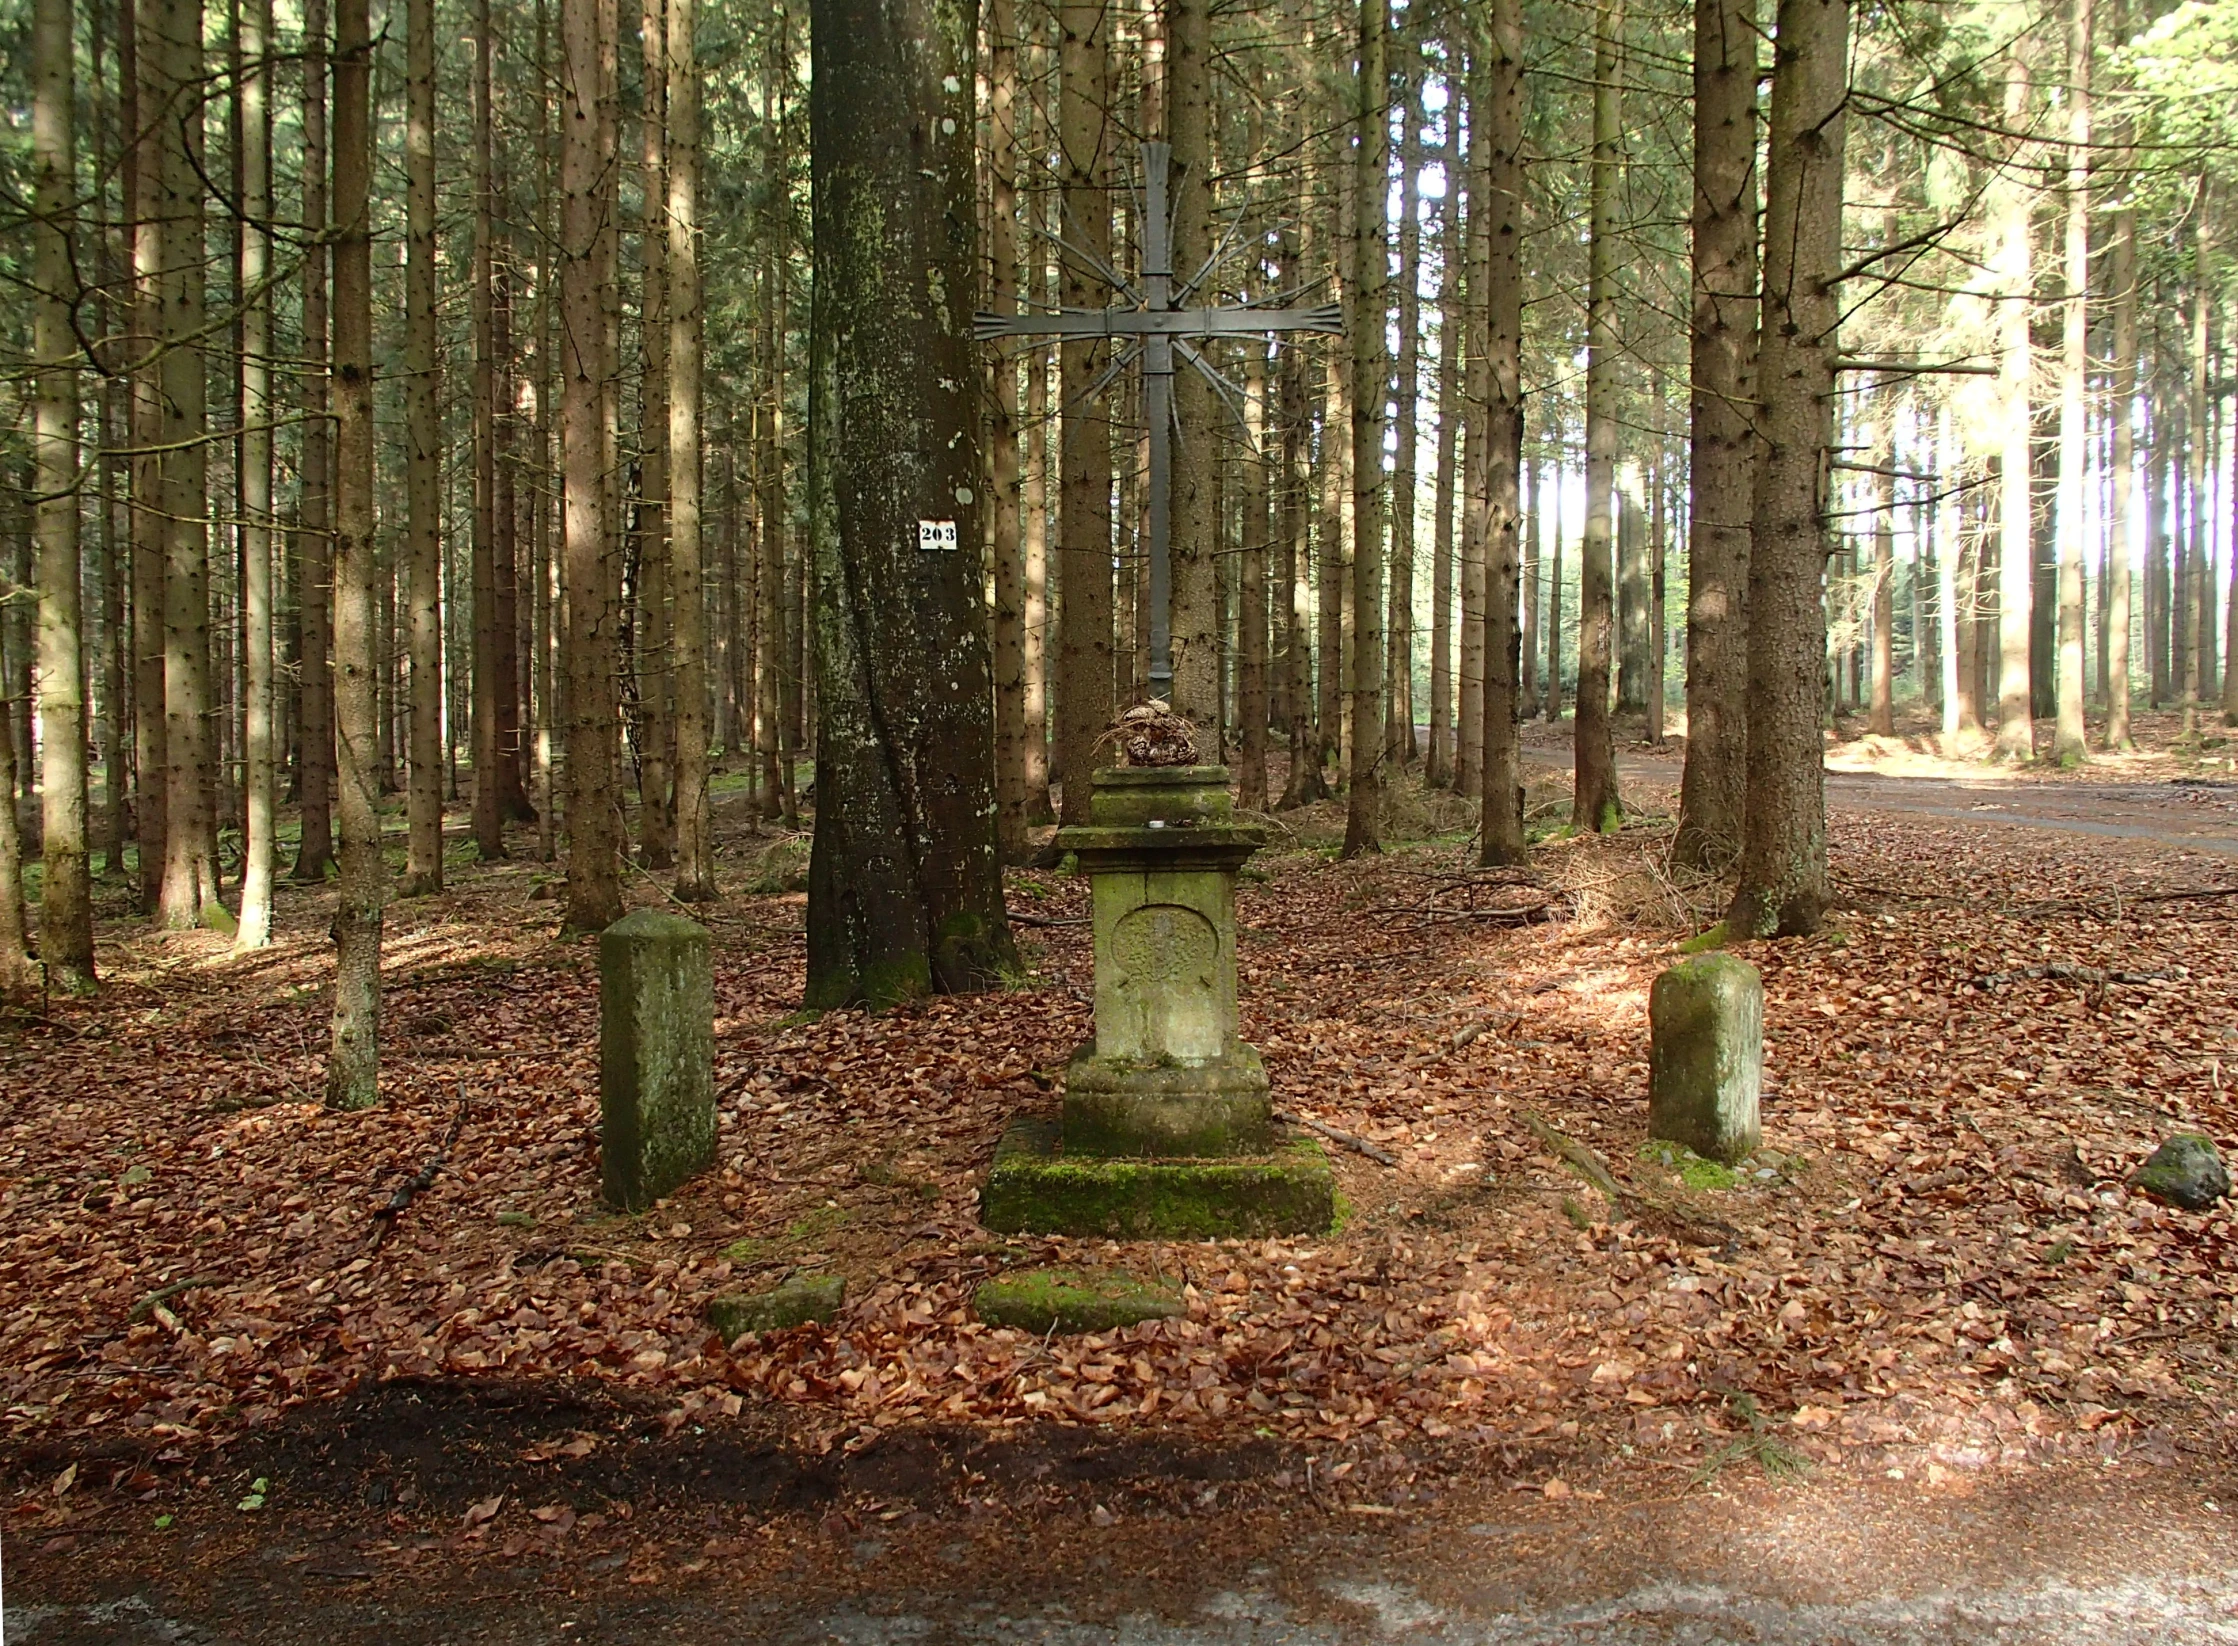 several stone pillars sitting next to each other in a forest